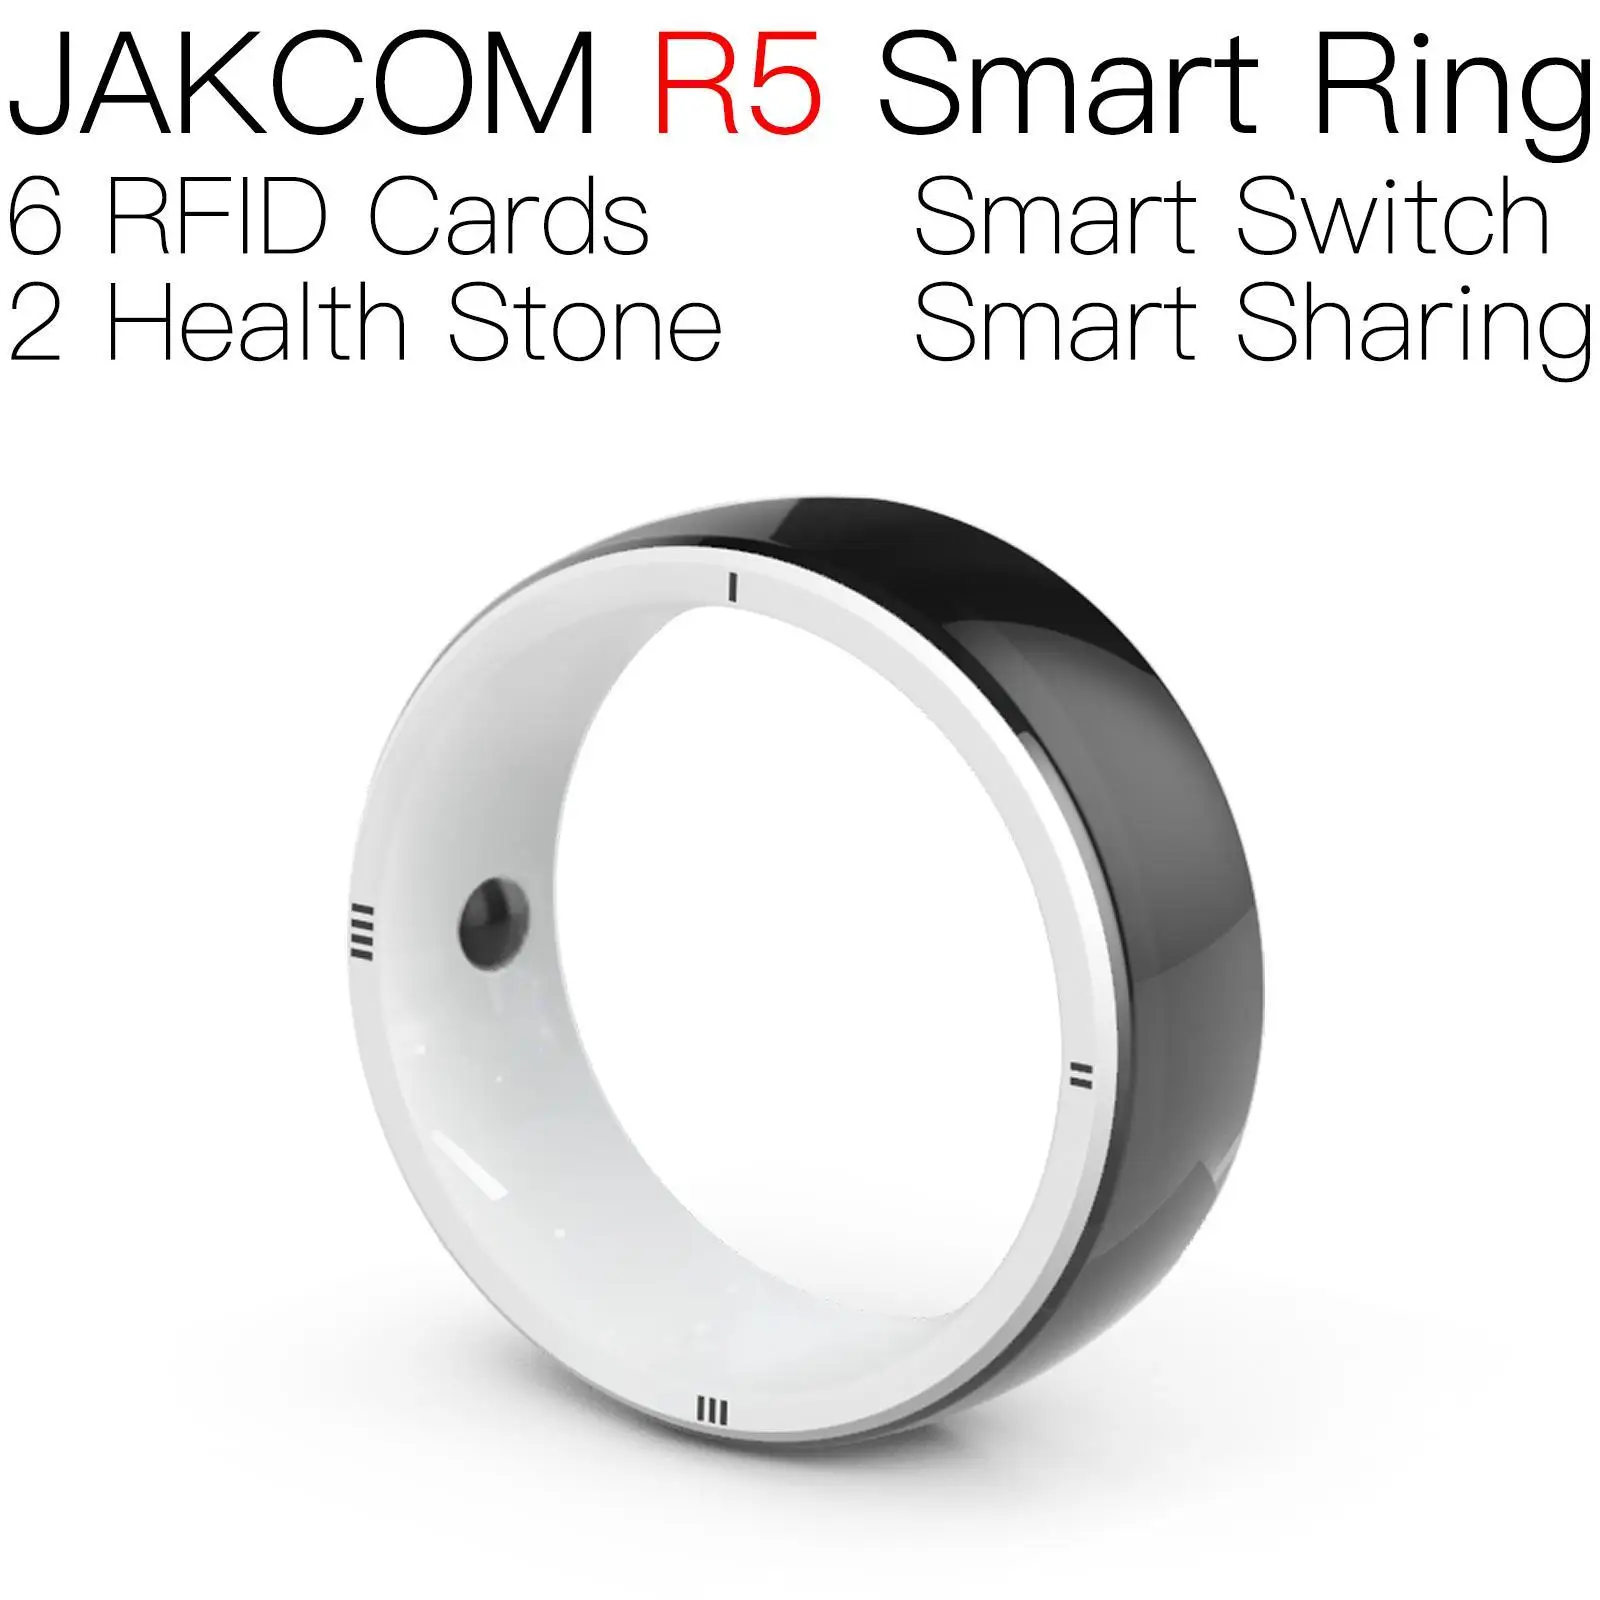 

JAKCOM R5 Smart Ring better than nfc chip free ic card hbo premium gracie pigeon rings with tag tags for glasses electra rfid